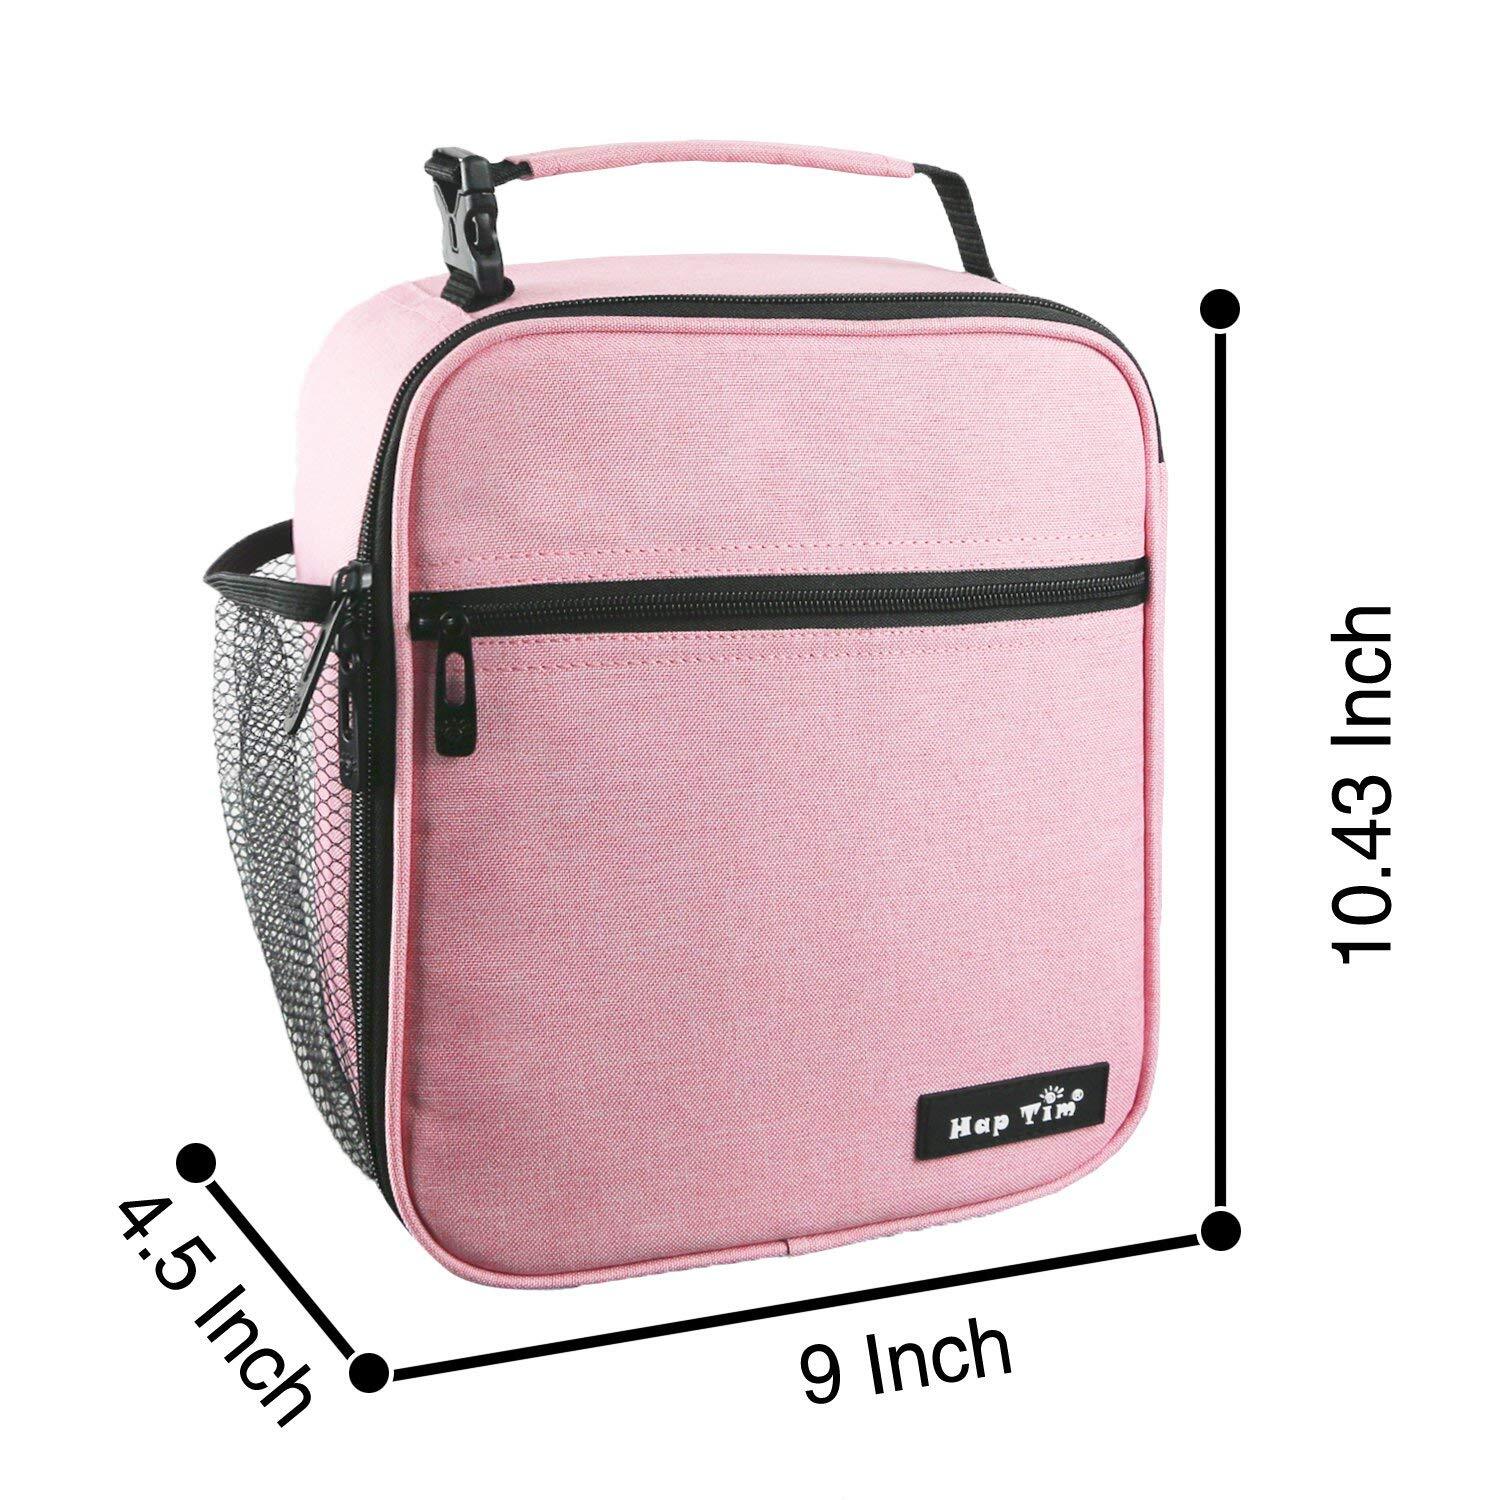 Insulated Recycled Lunch Box - Pink & Yellow